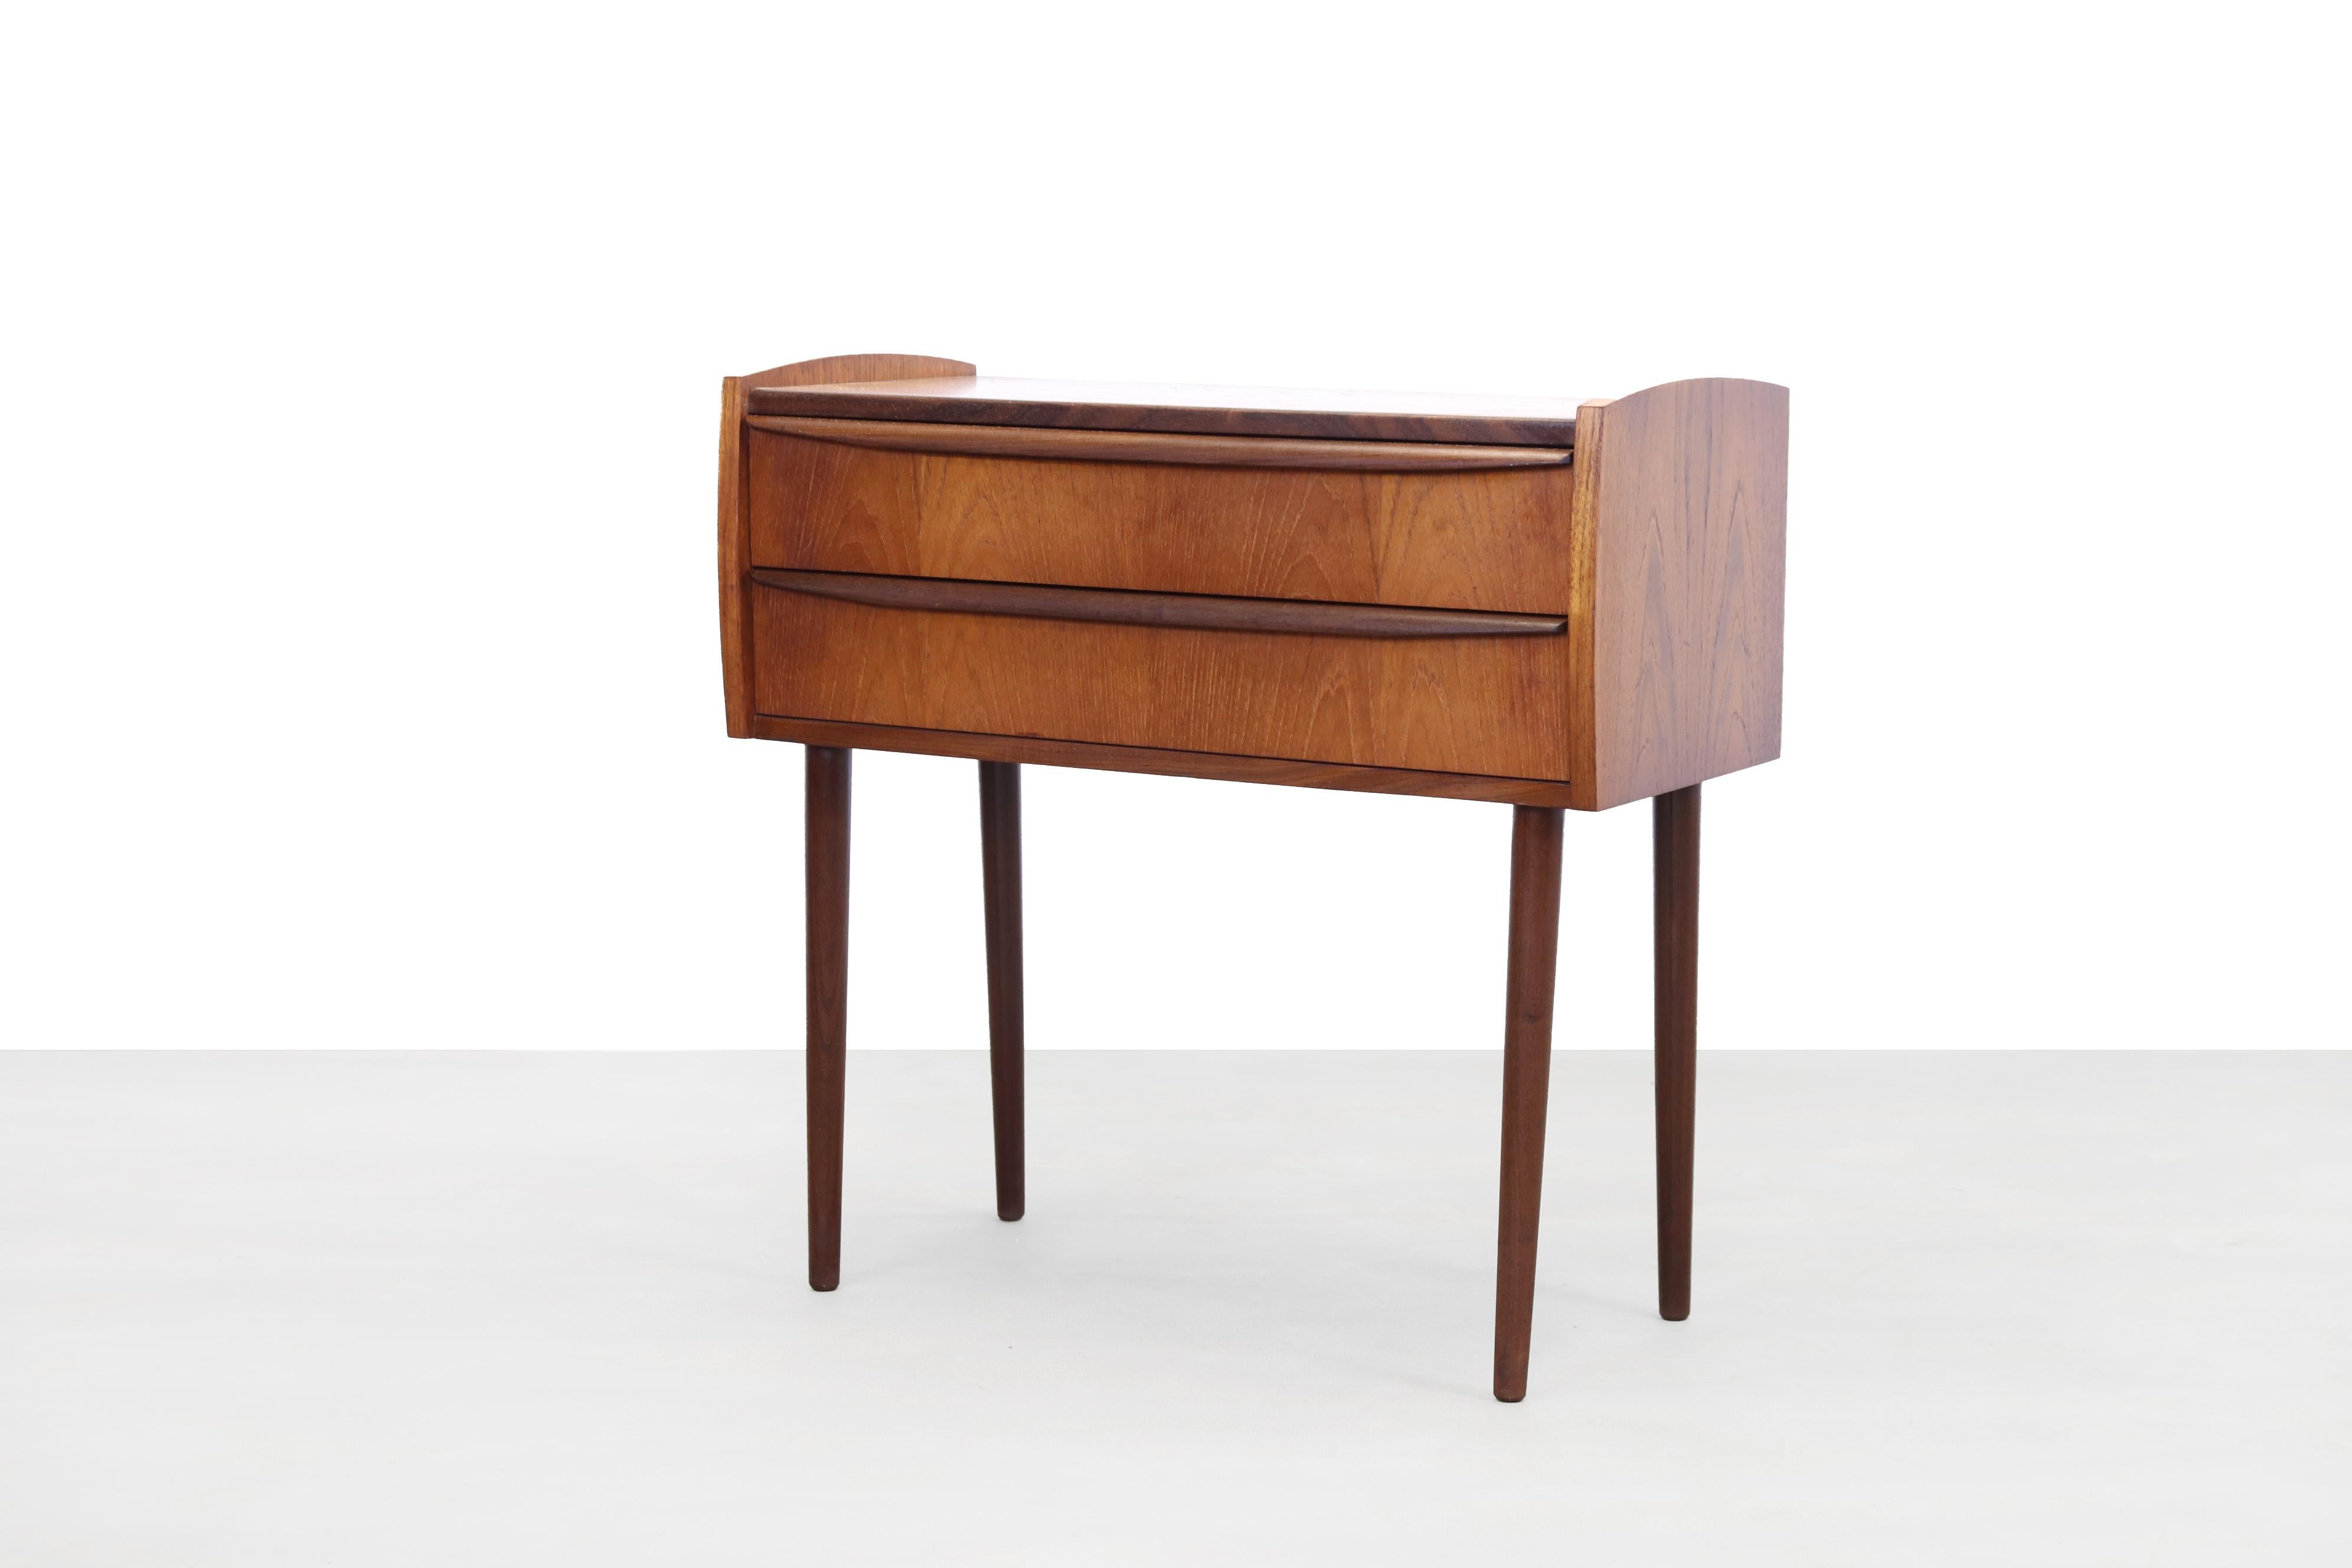 Danish design chest of drawers with 2 drawers. Made of teak. The design of the cabinet is typically Mid-Century Modern, straight and without fuss, with beautiful round details in the edges and the handles of the drawers. Nice size that you can put